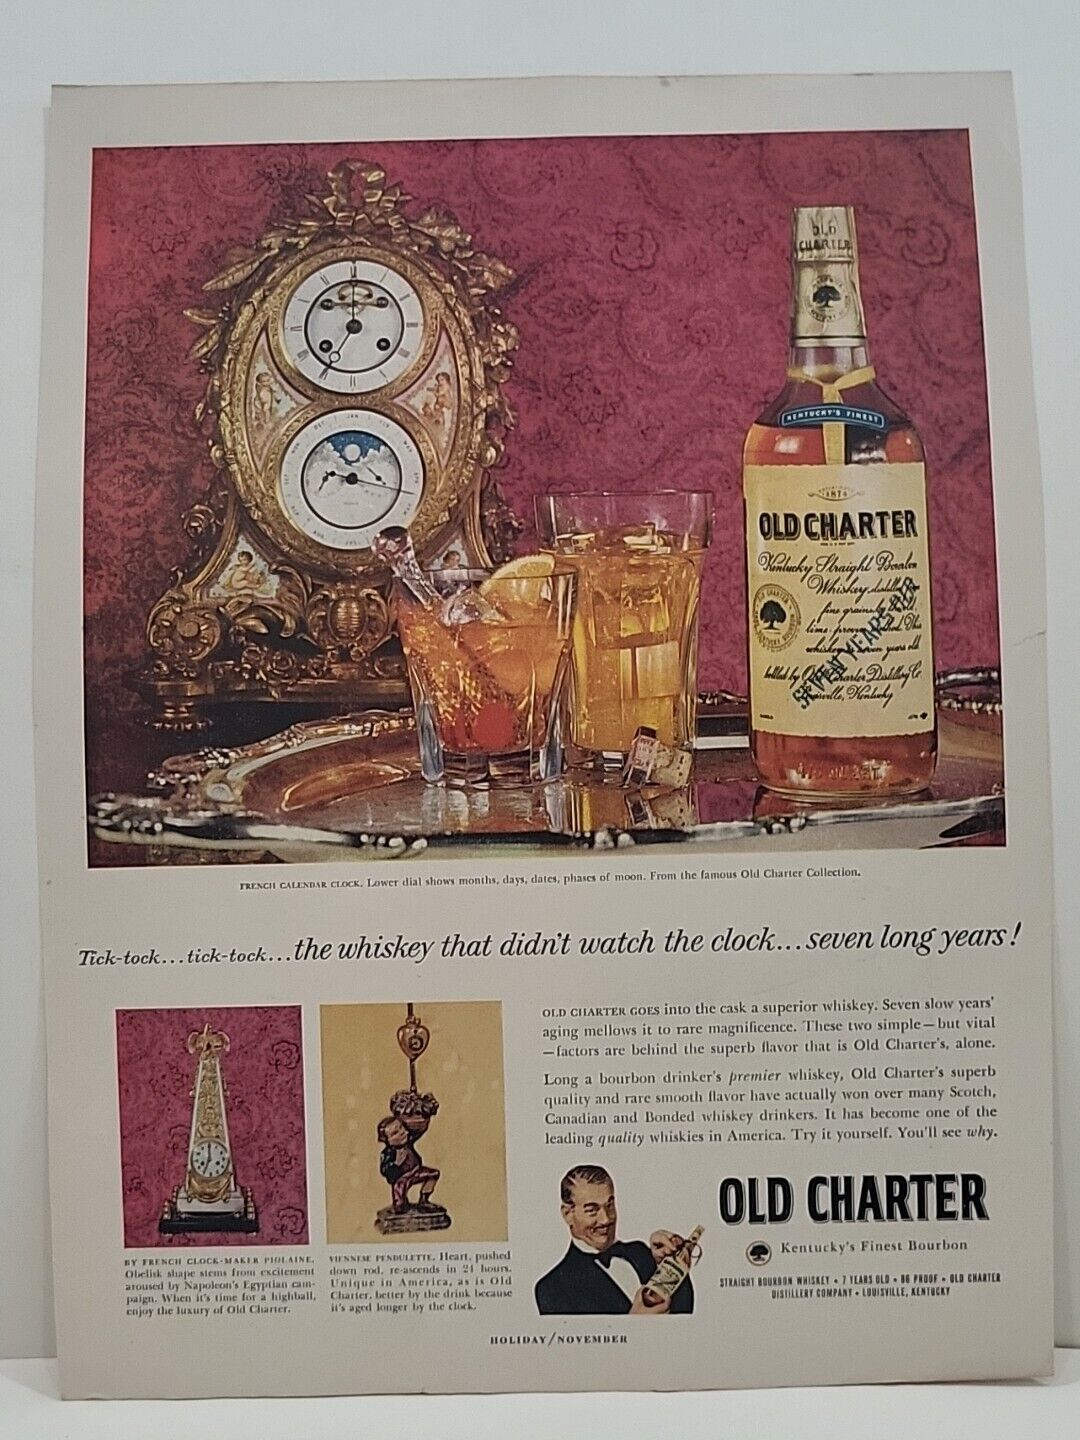 1953 Old Charter Whiskey Bourbon Holiday Print Ad French Calendar Clock bottle